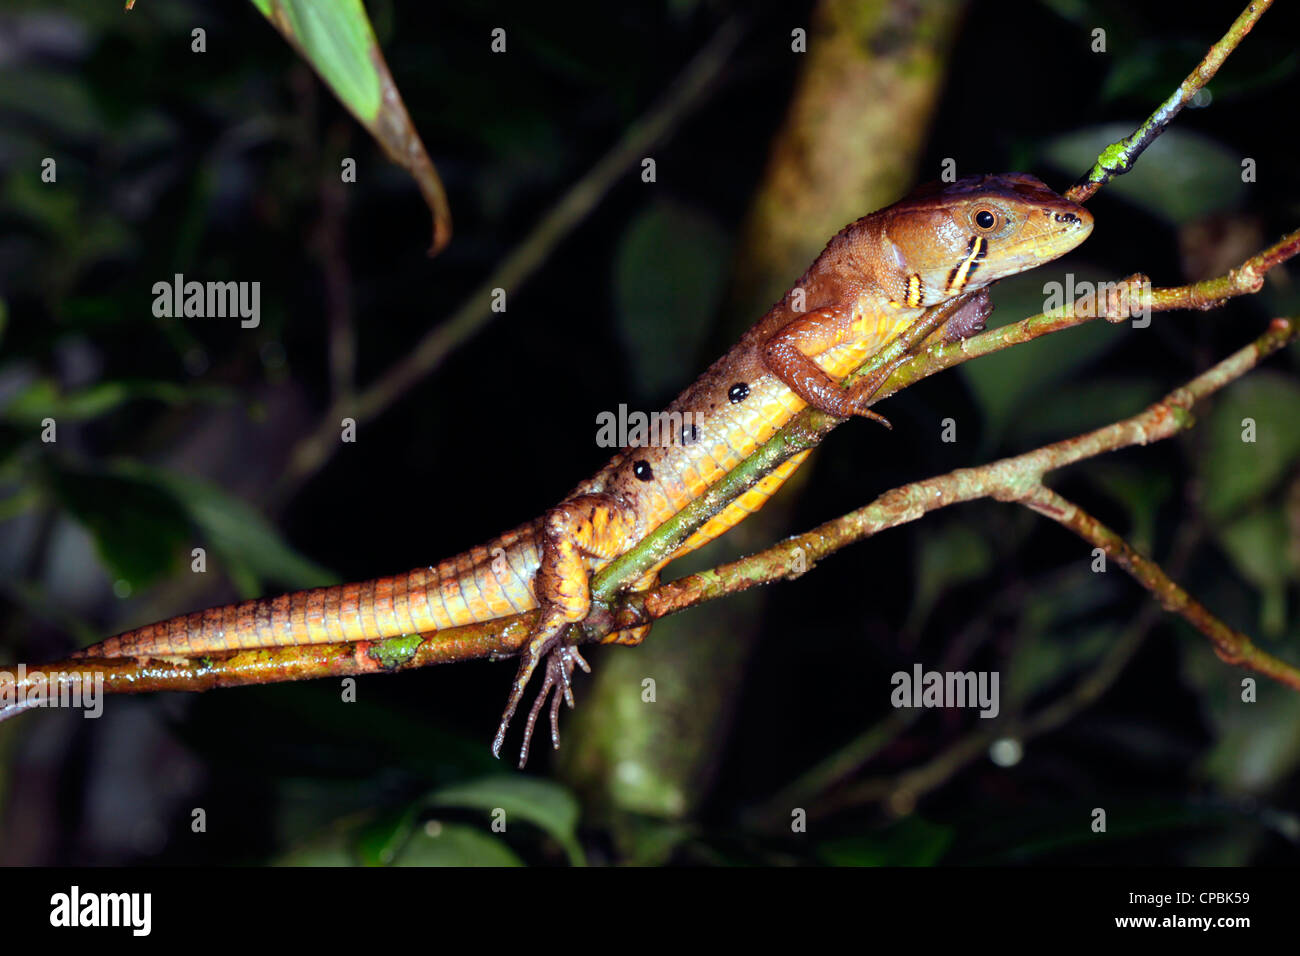 Lizard (Potamites sp., family Gymnophthalmidae) resting in an understory shrub in the rainforest at night, Ecuador Stock Photo